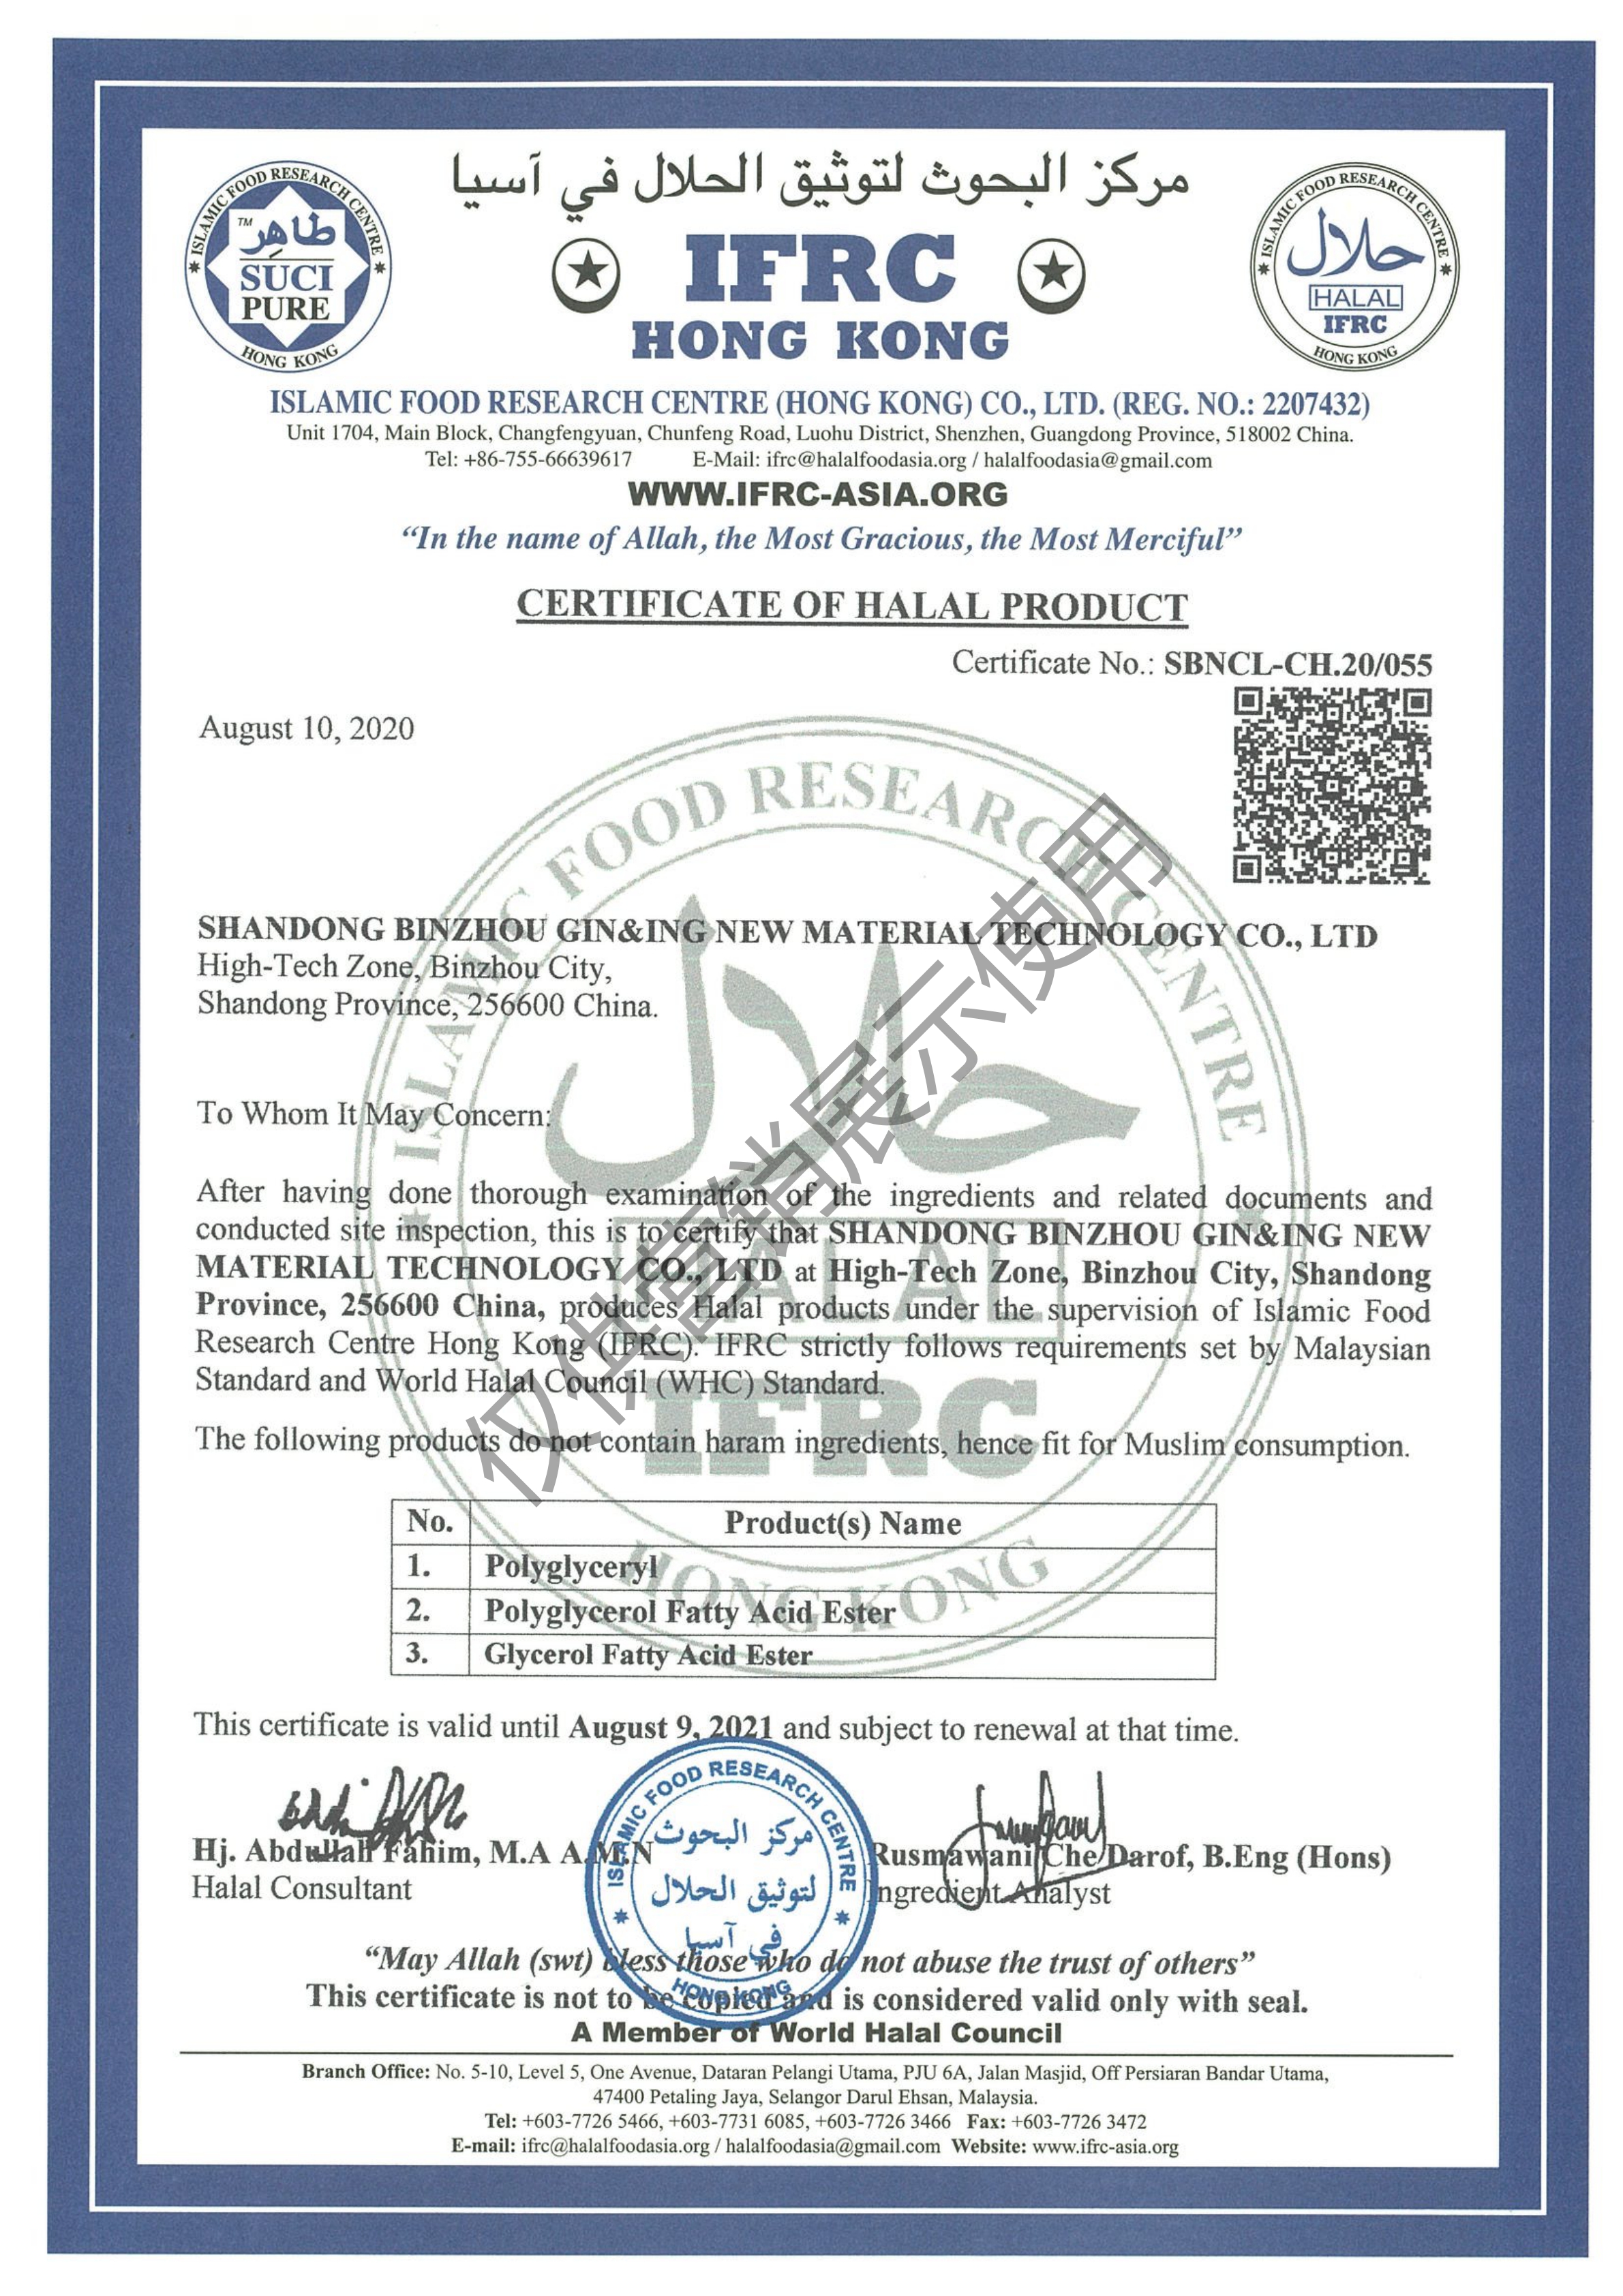 We applied for HALAL certification and passed the on-site exa